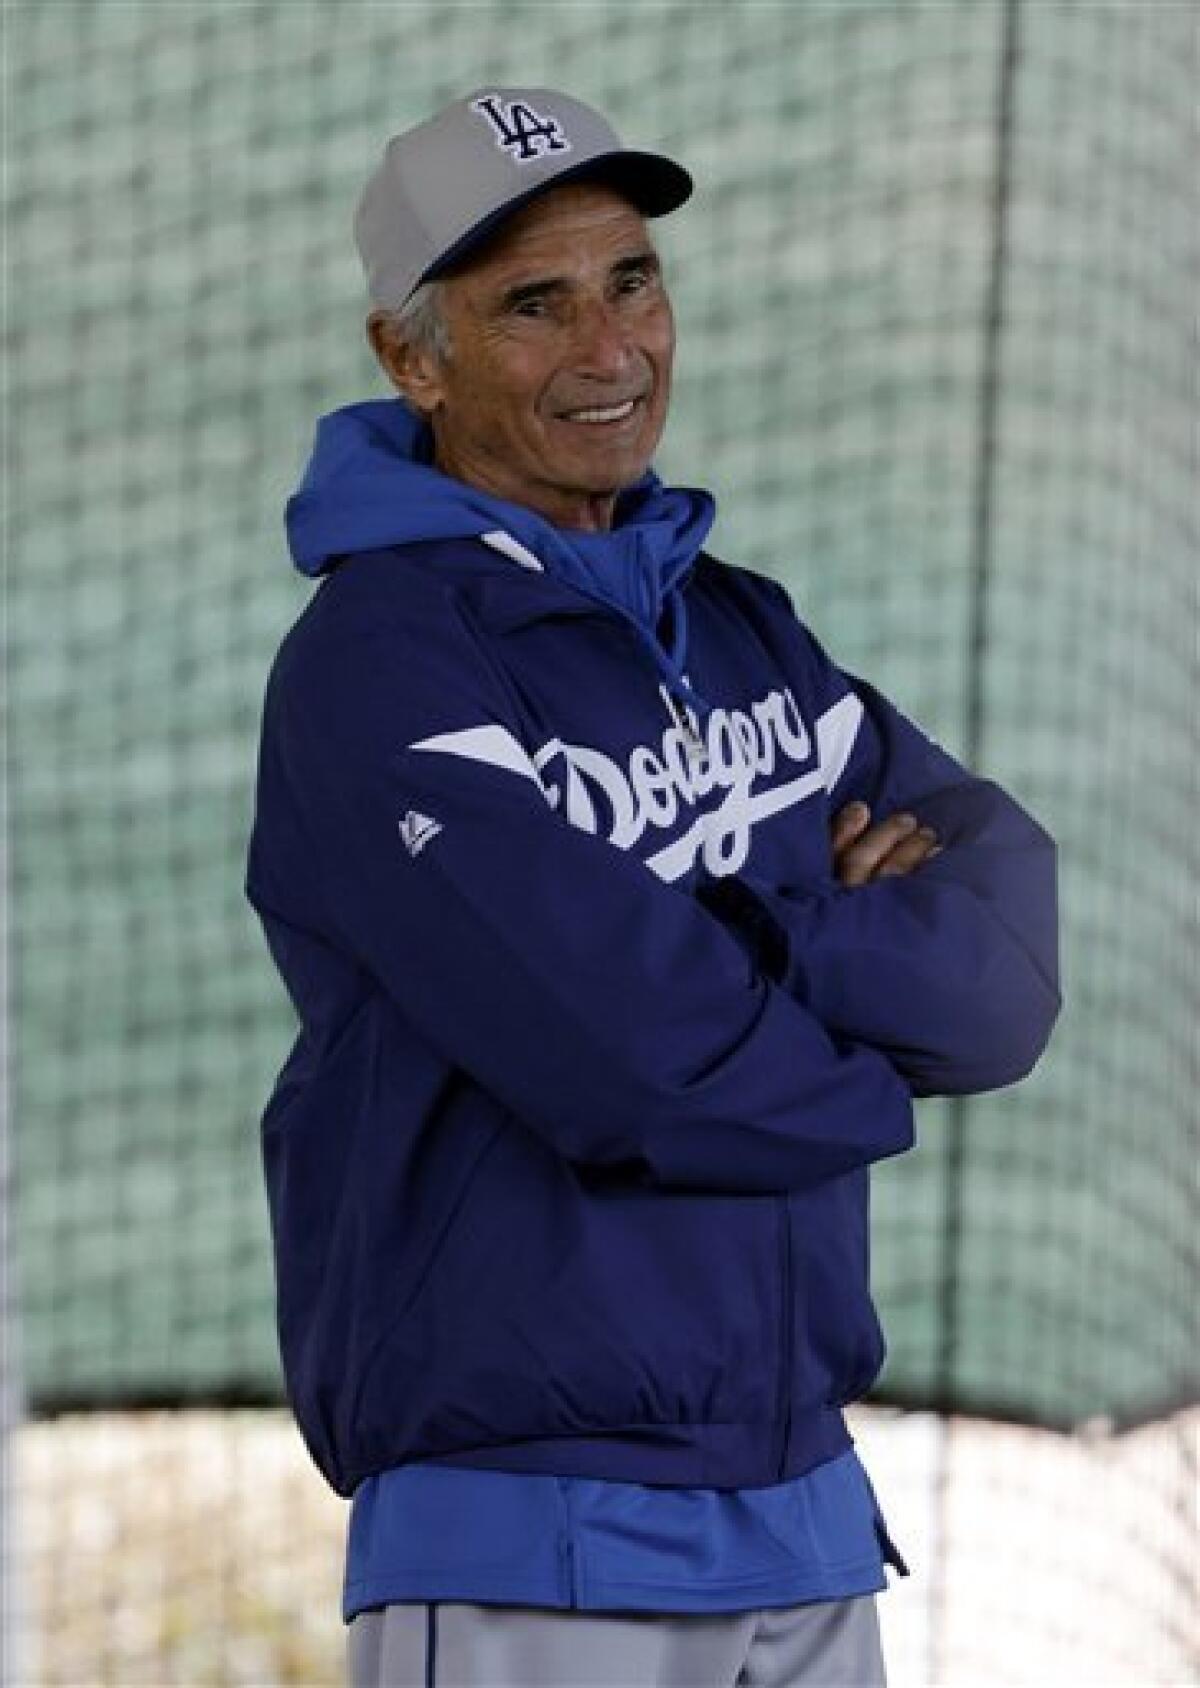 The Life and Career of Sandy Koufax